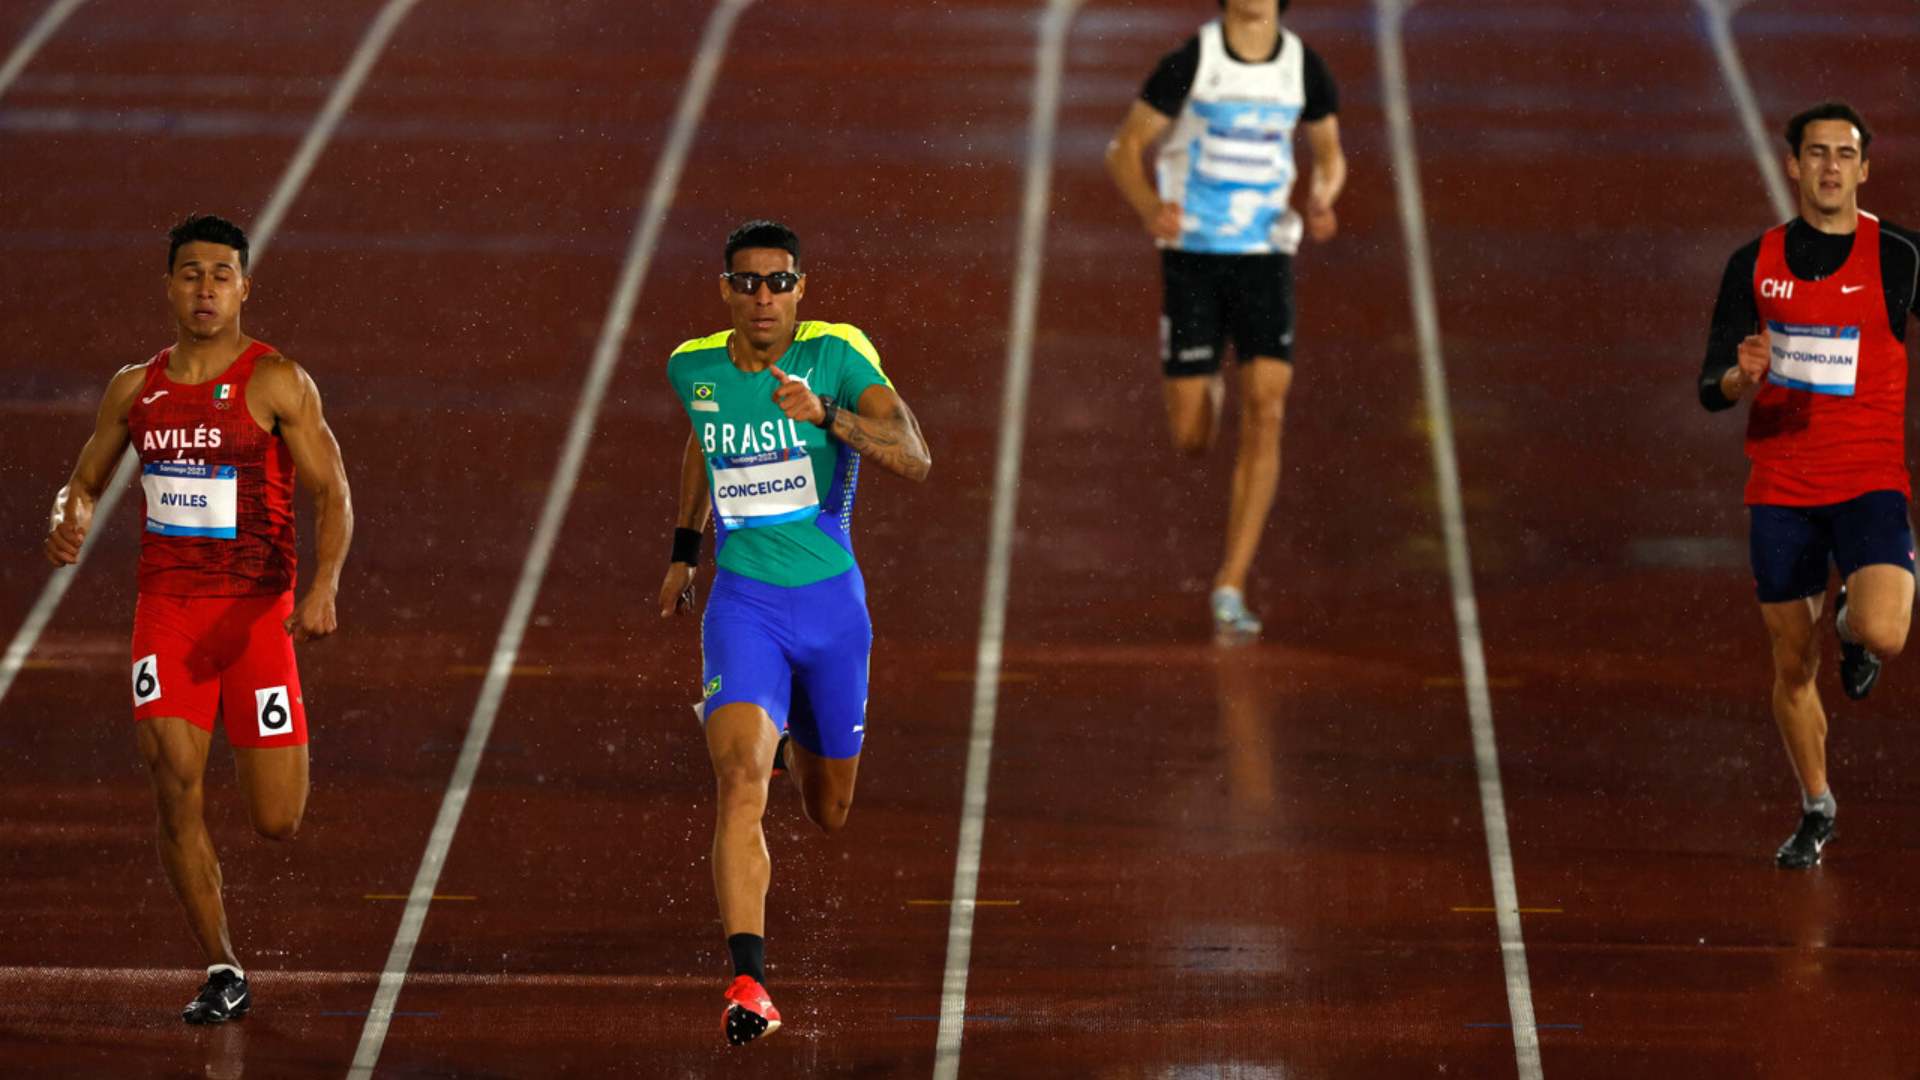 Chilean athlete Martín Kouyoumdjian won the 44th medal for Chile in the 400 meters